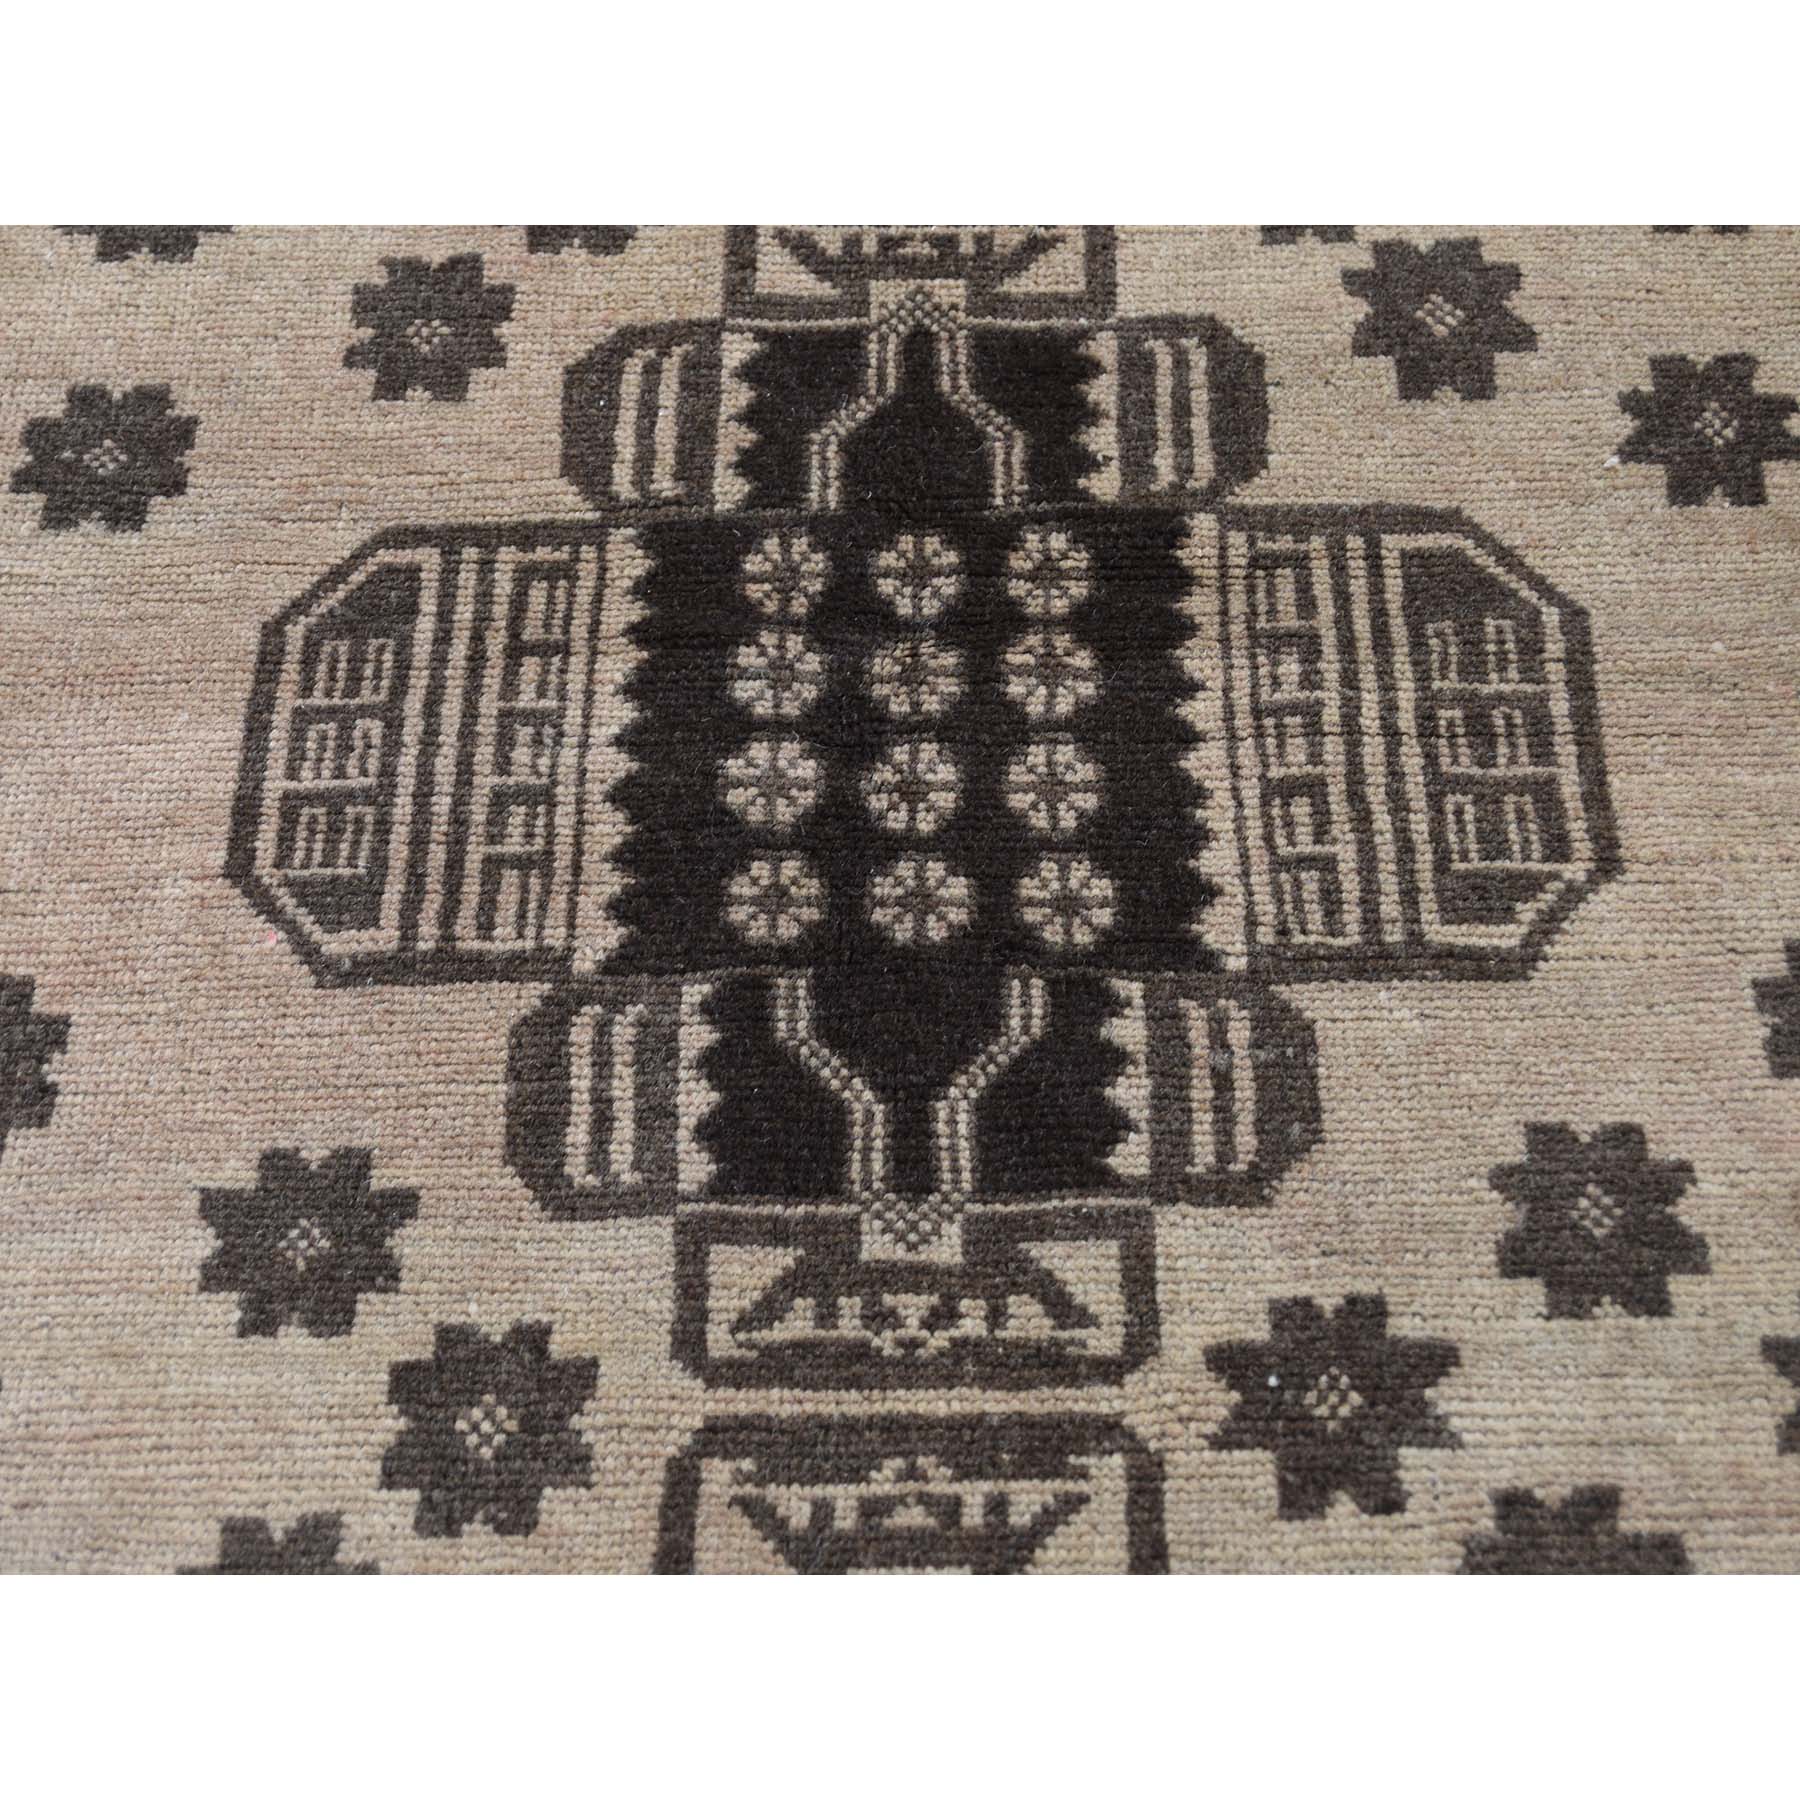 6-7 x9-8  Vintage Afghan Baluch Natural Color Hand-Knotted Pure Wool Oriental Rug 